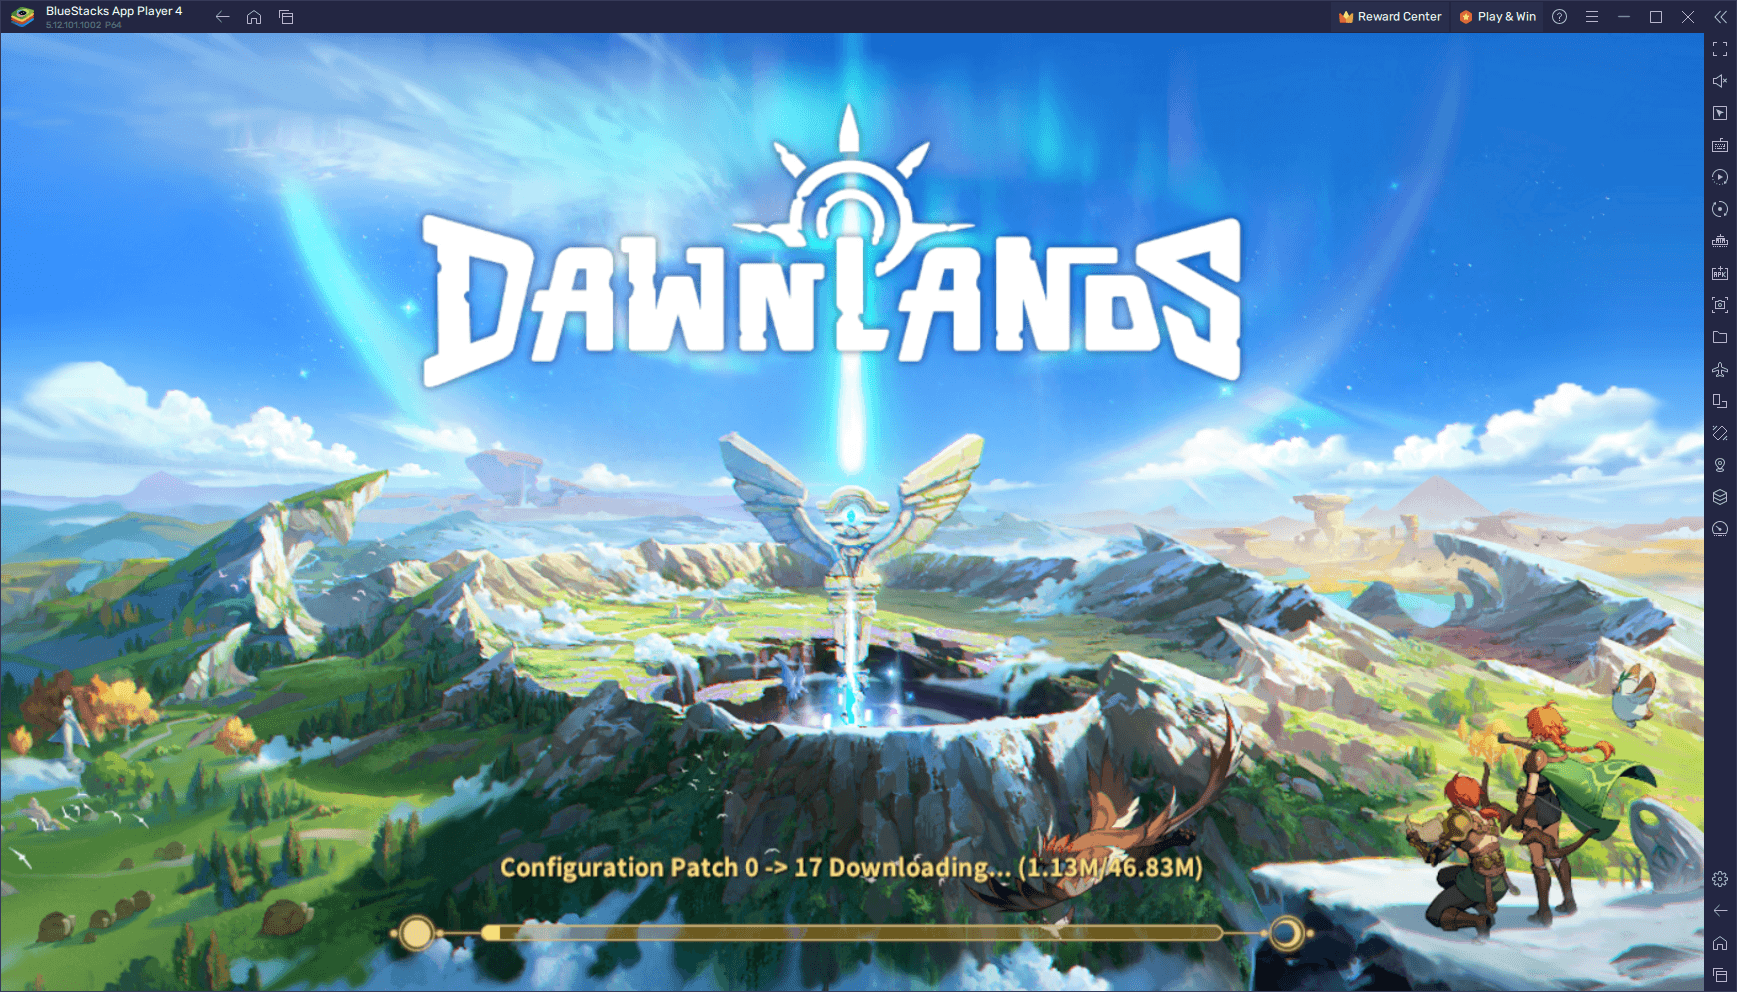 How to Play Dawnlands on PC with BlueStacks